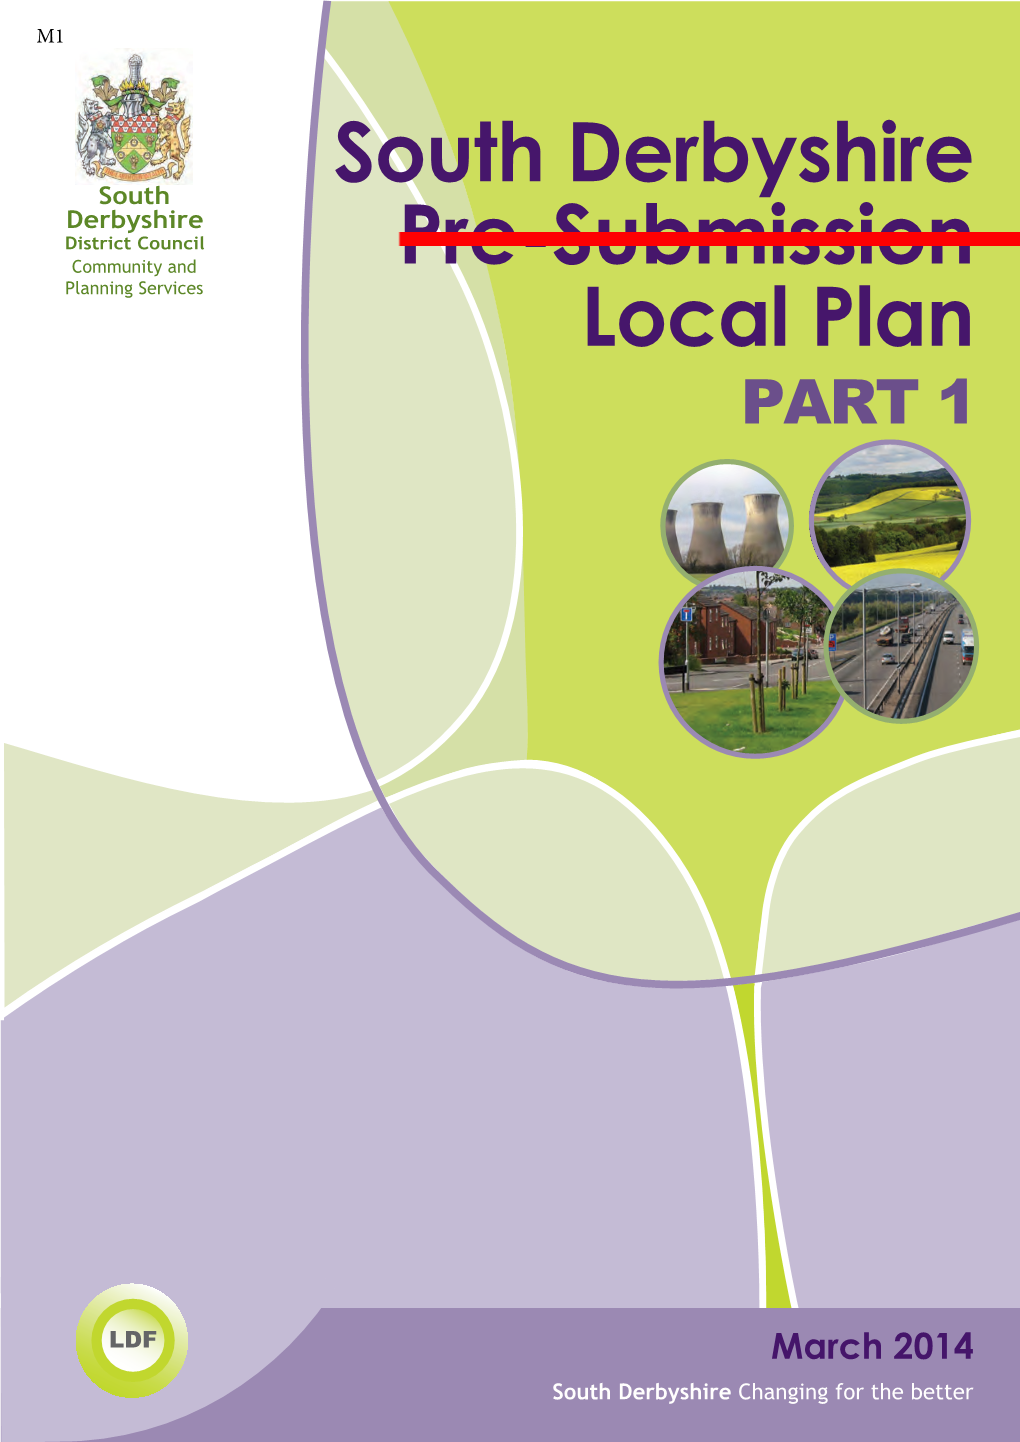 South Derbyshire Pre-Submission Local Plan